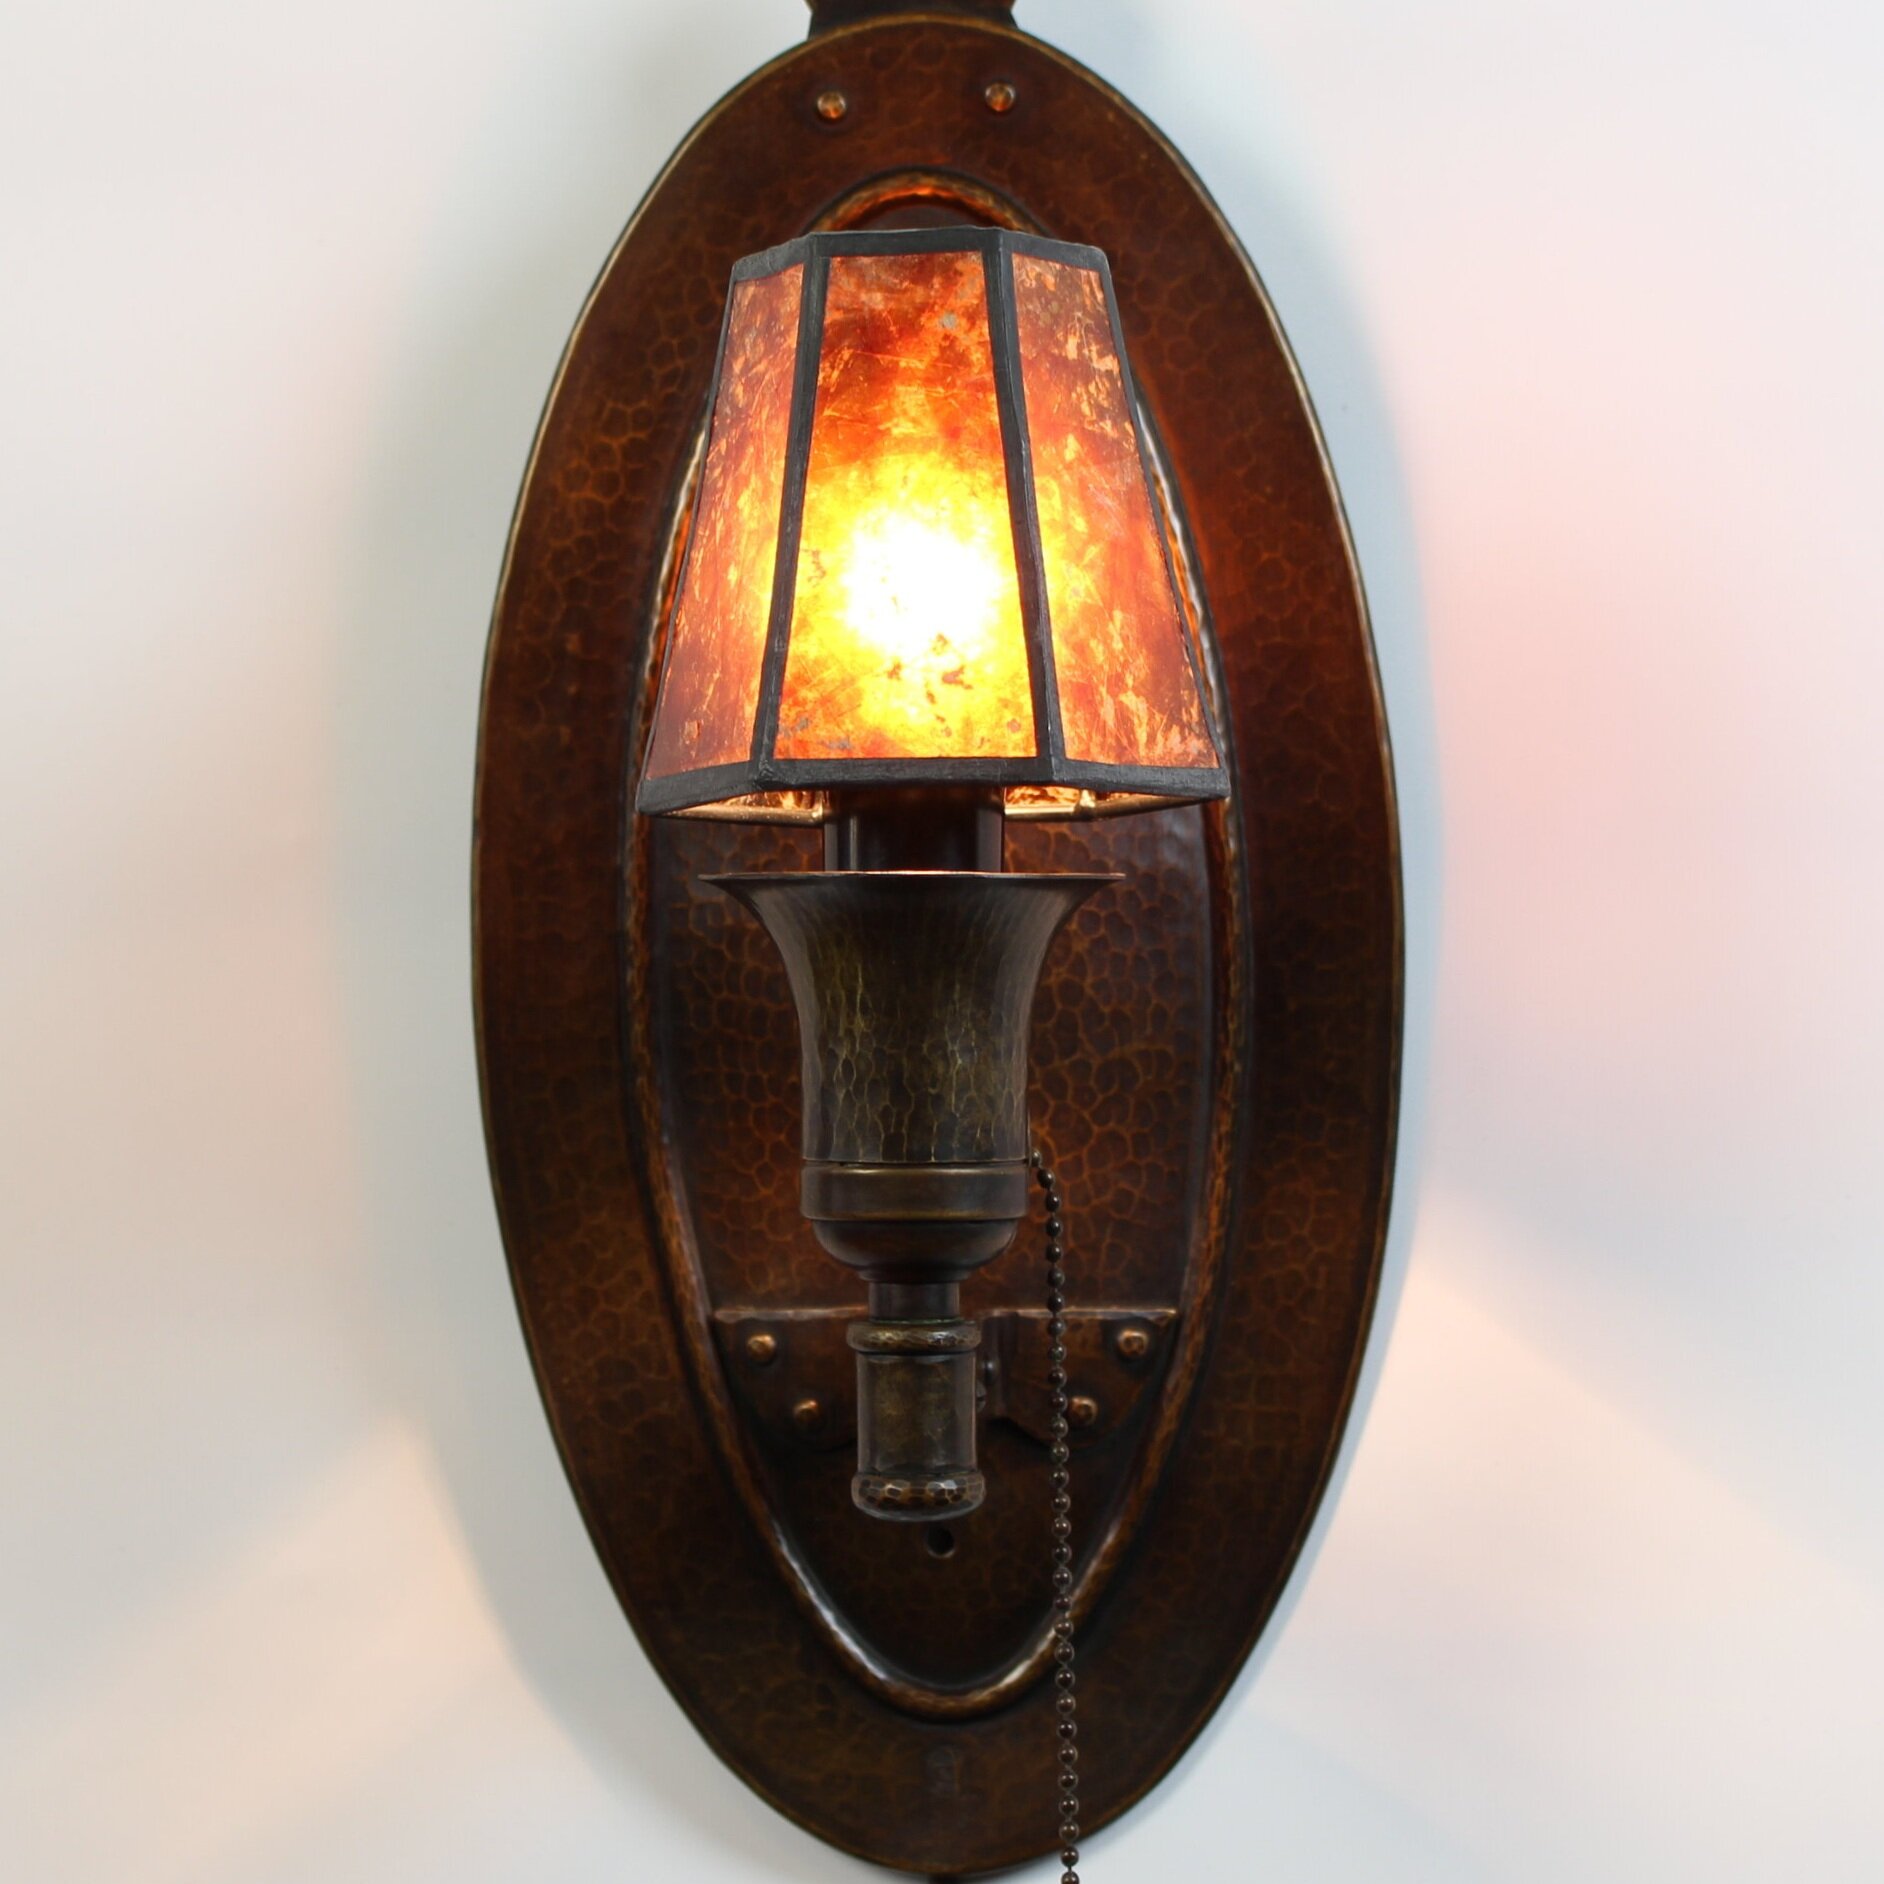 SOLD, Gustav Stickley Electric Wall Sconces